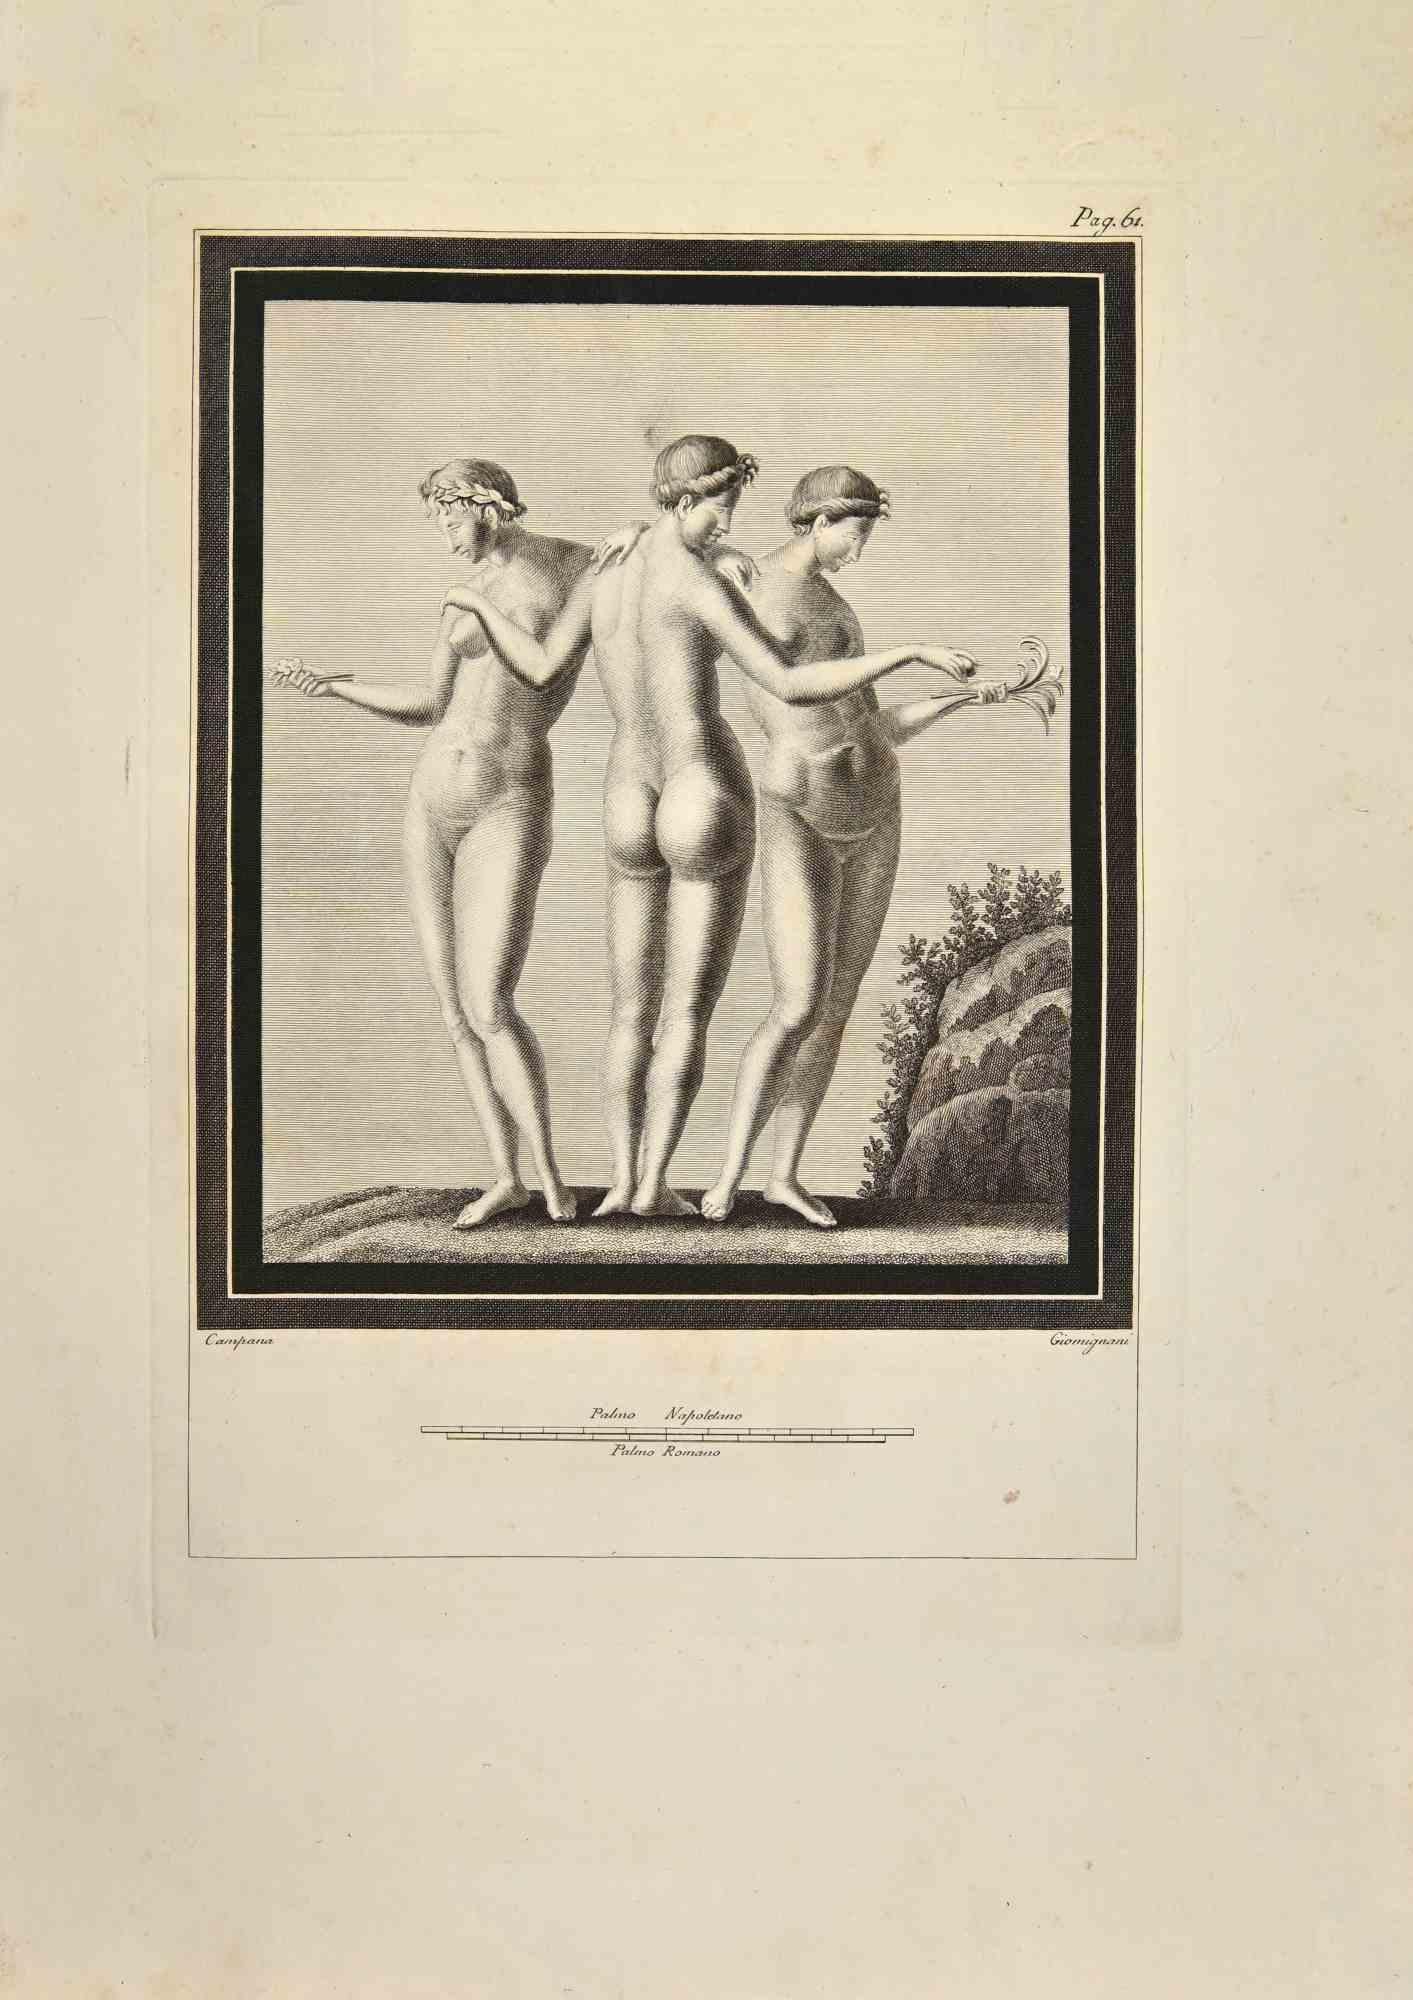 The Three Graces from "Antiquities of Herculaneum" is an etching on paper realized by Ferdinando Campana in the 18th Century.

Signed on the plate.

Good conditions with foxing, due to the time

The etching belongs to the print suite “Antiquities of